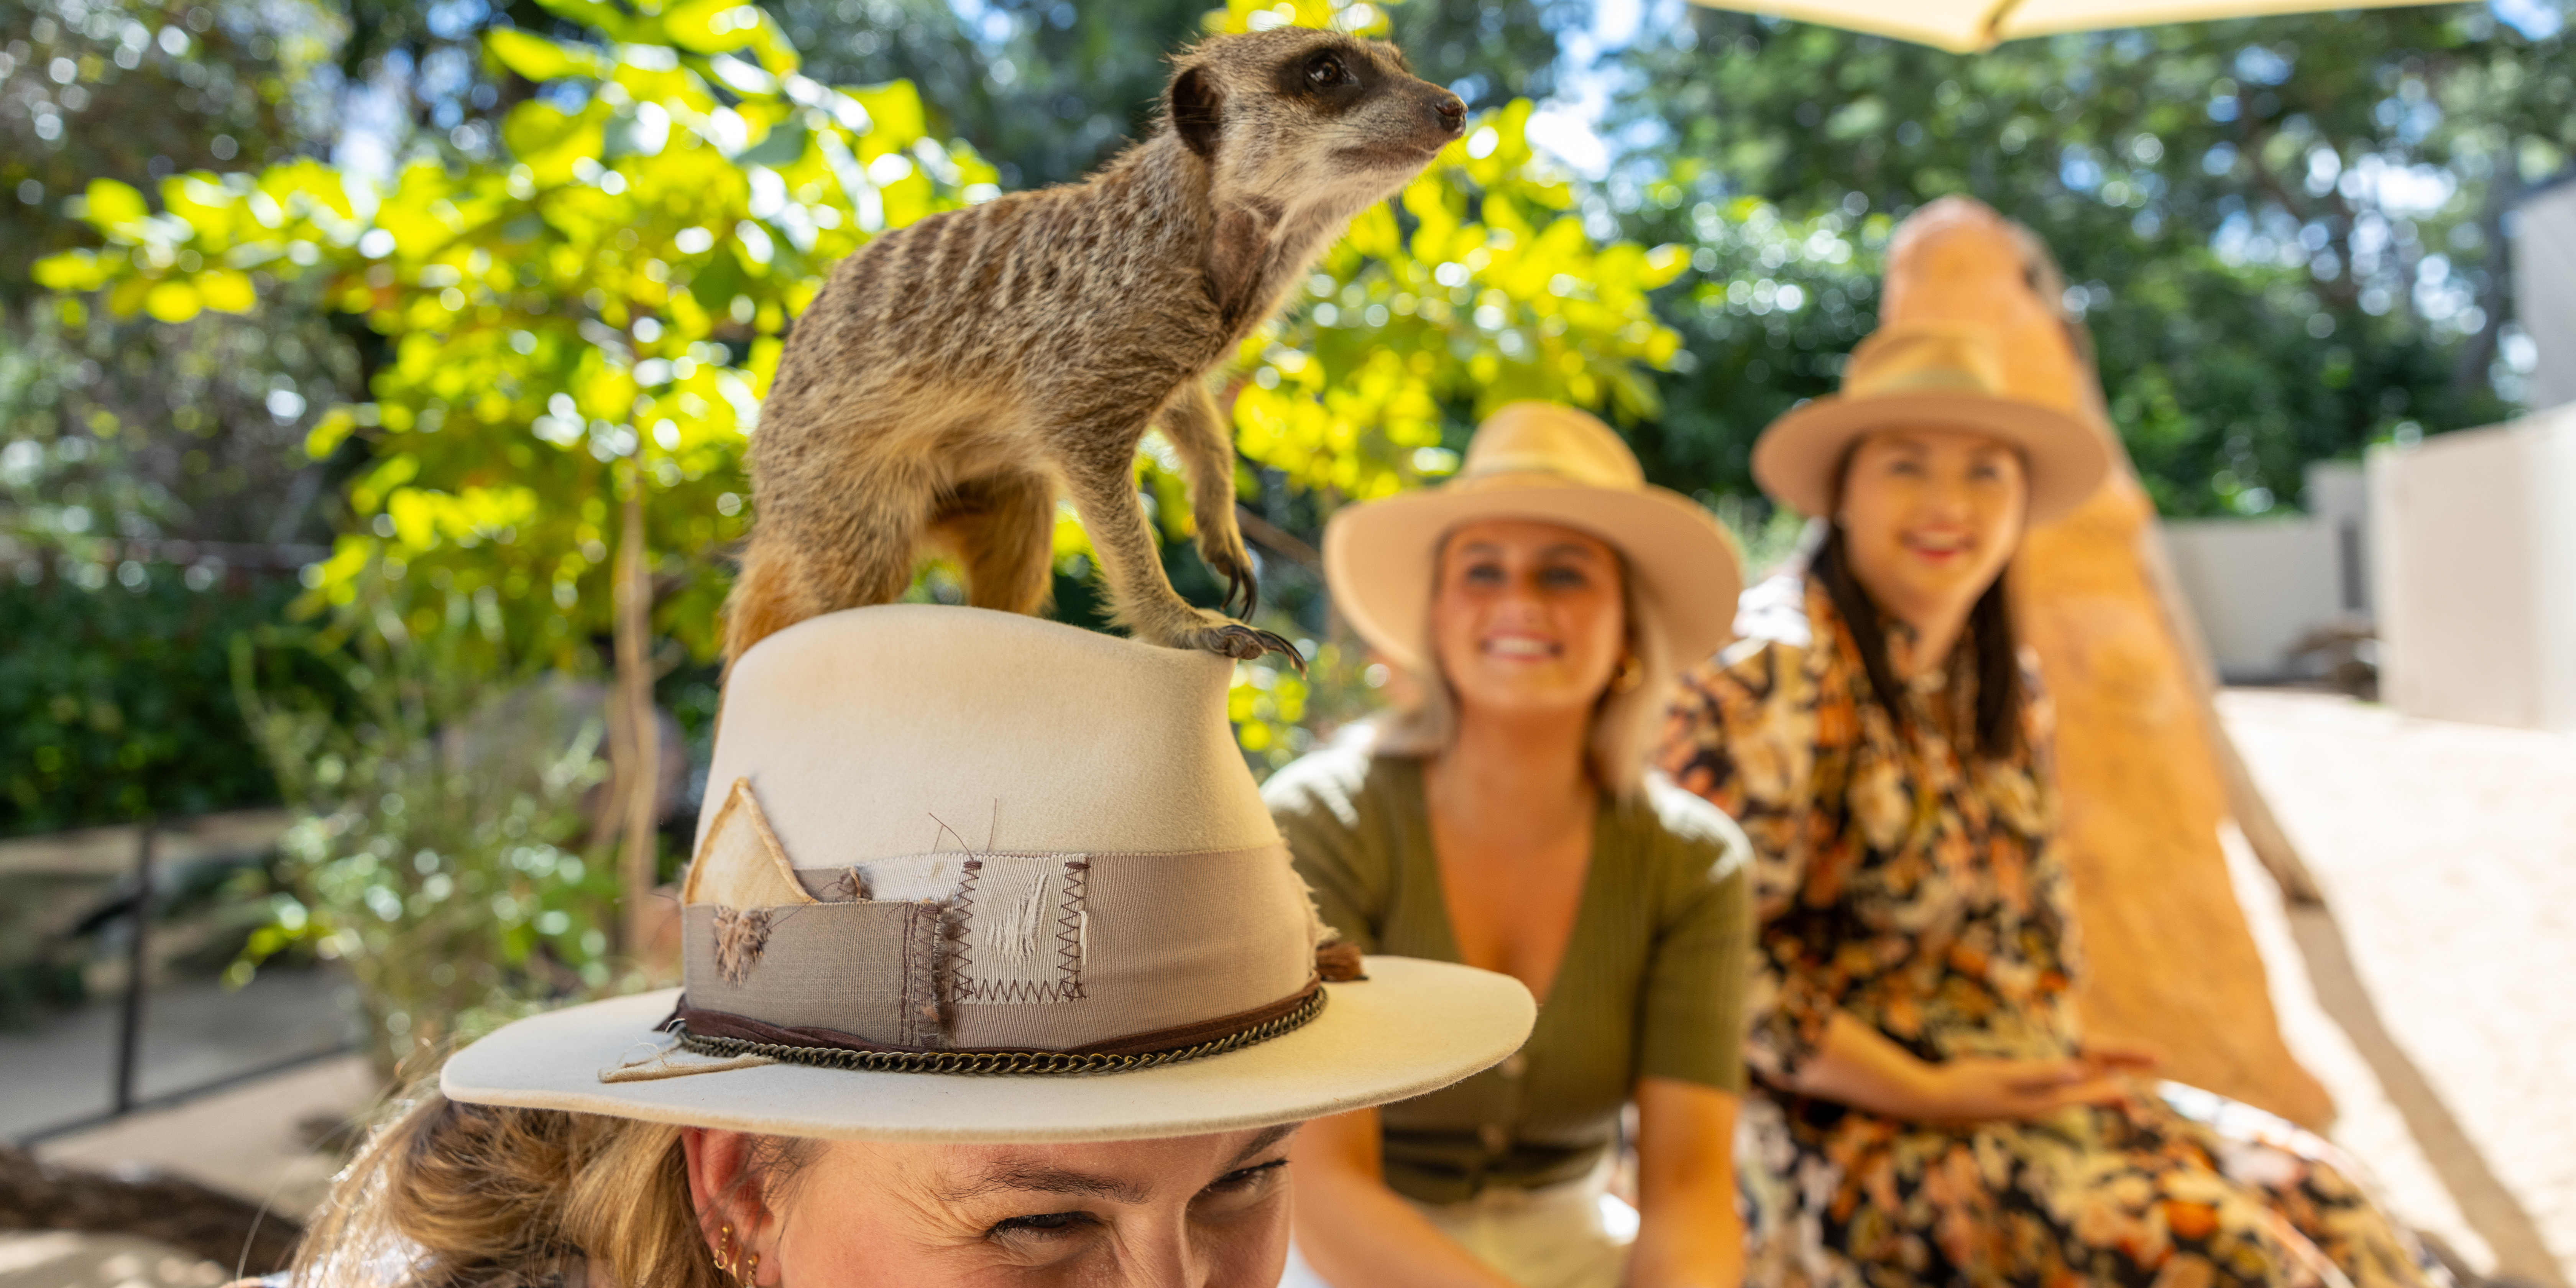 Close up photo of a meerkat climbing on the hat of a young woman while her friends look smiling in the background